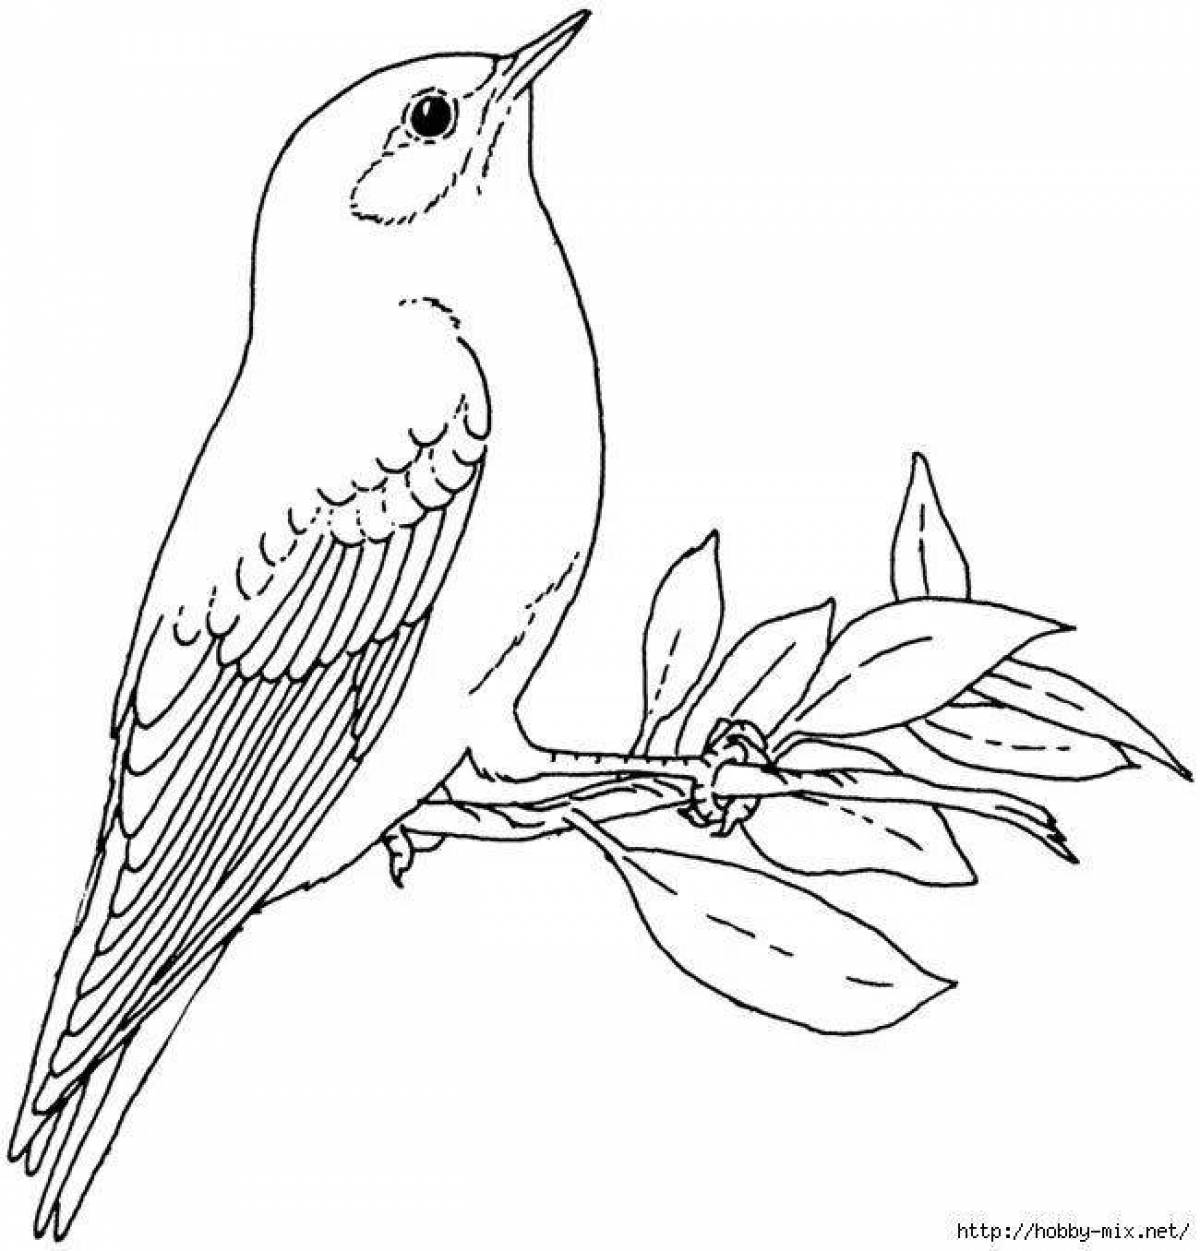 Awesome nightingale coloring page